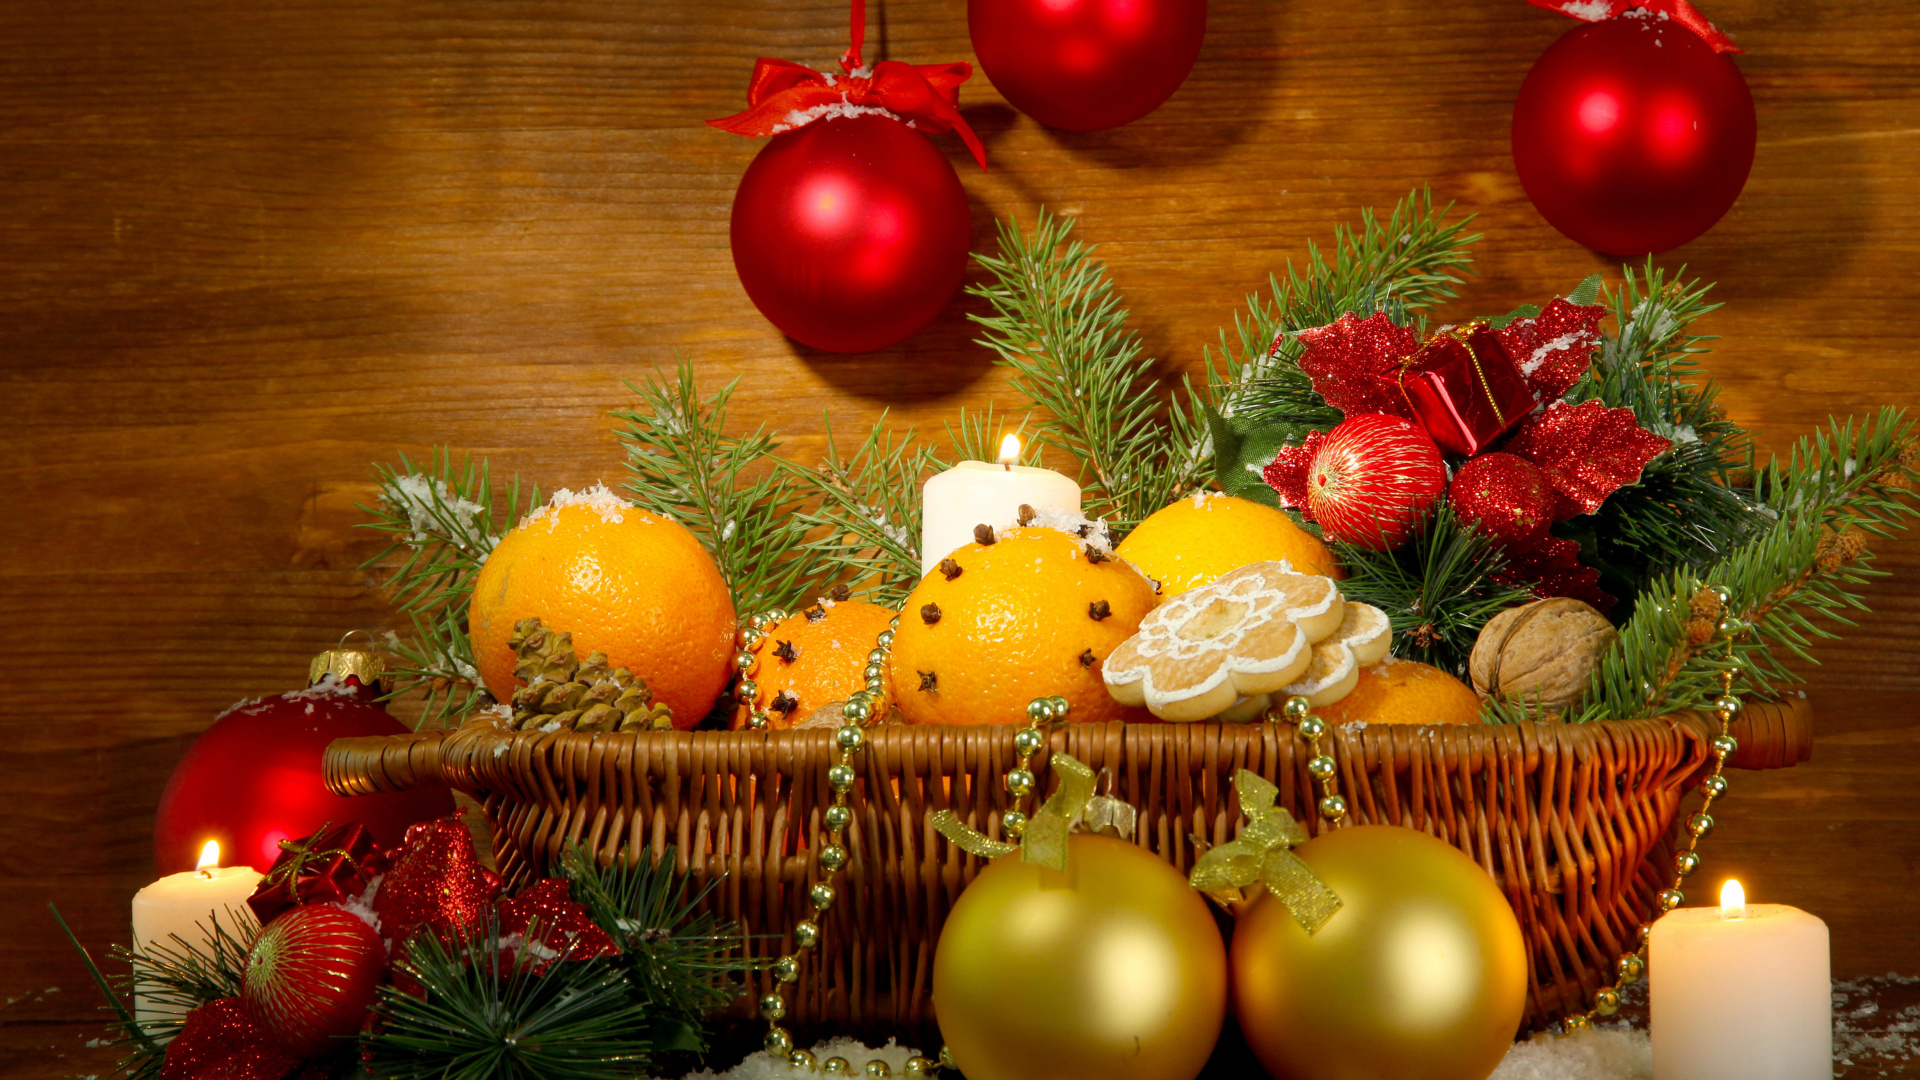 New Year, Christmas Day, Christmas Ornament, Christmas Decoration, Still Life. Wallpaper in 1920x1080 Resolution